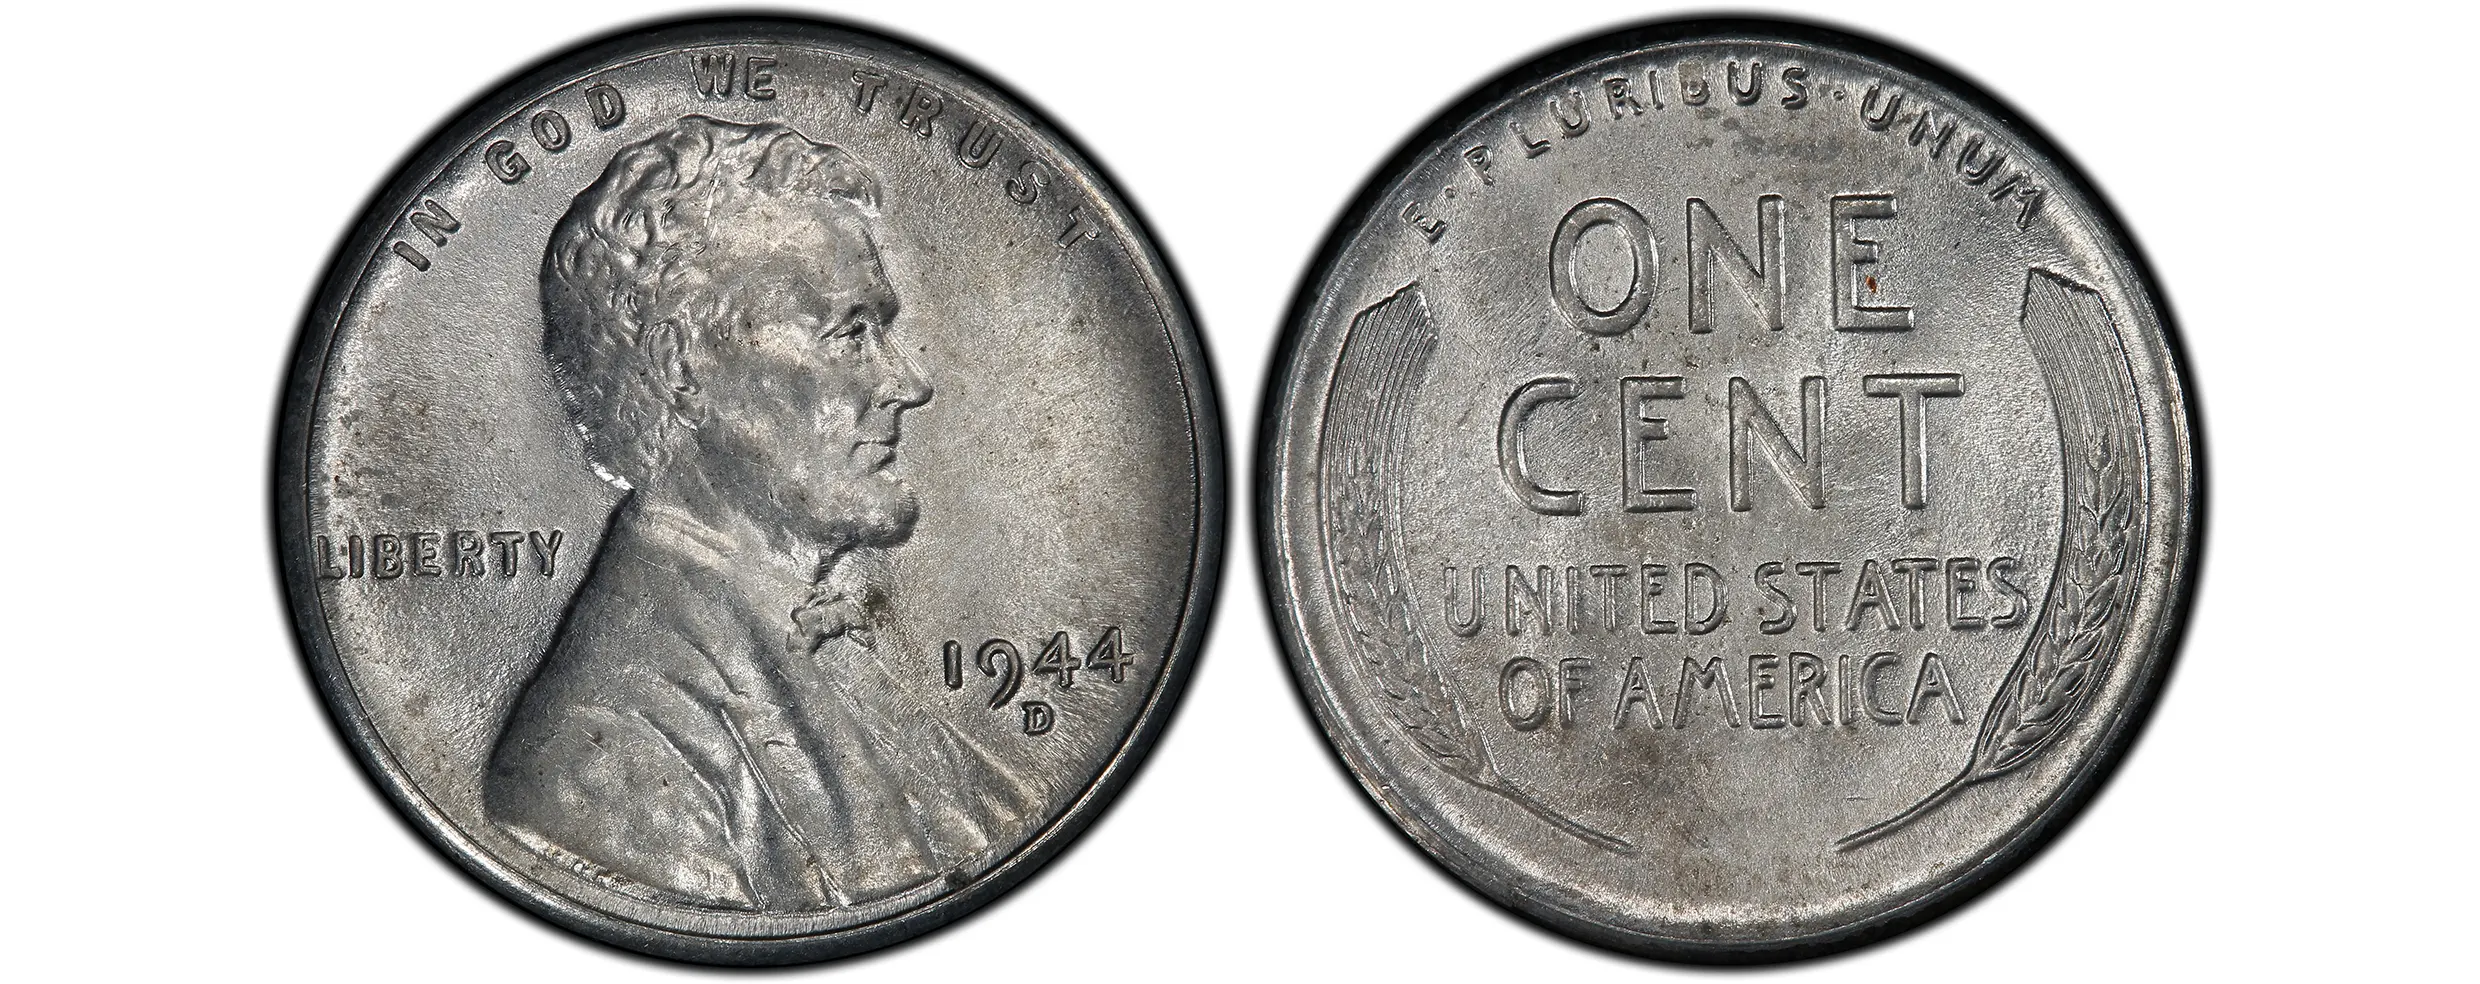 1944-D Lincoln Penny (Zinc-coated steel)